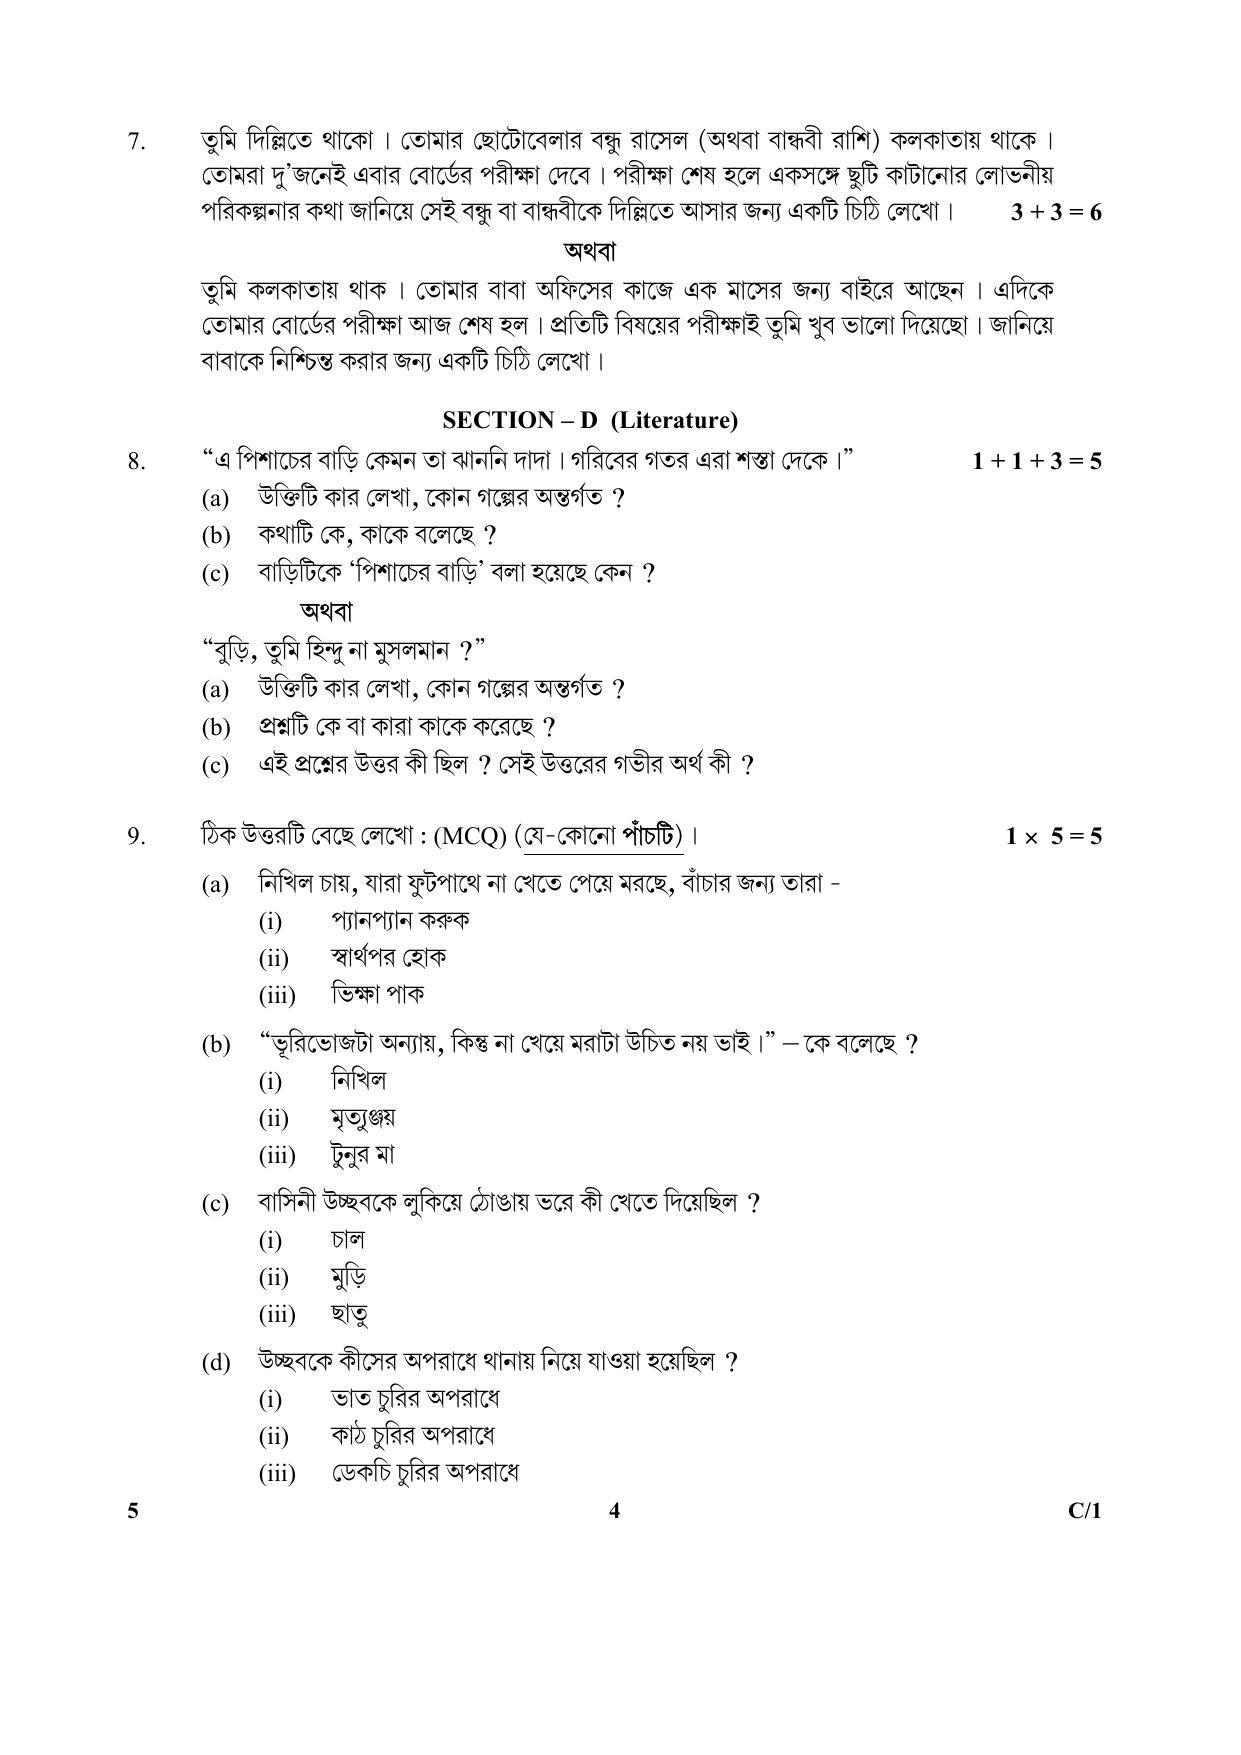 CBSE Class 12 5 (Bengali) 2018 Compartment Question Paper - Page 4